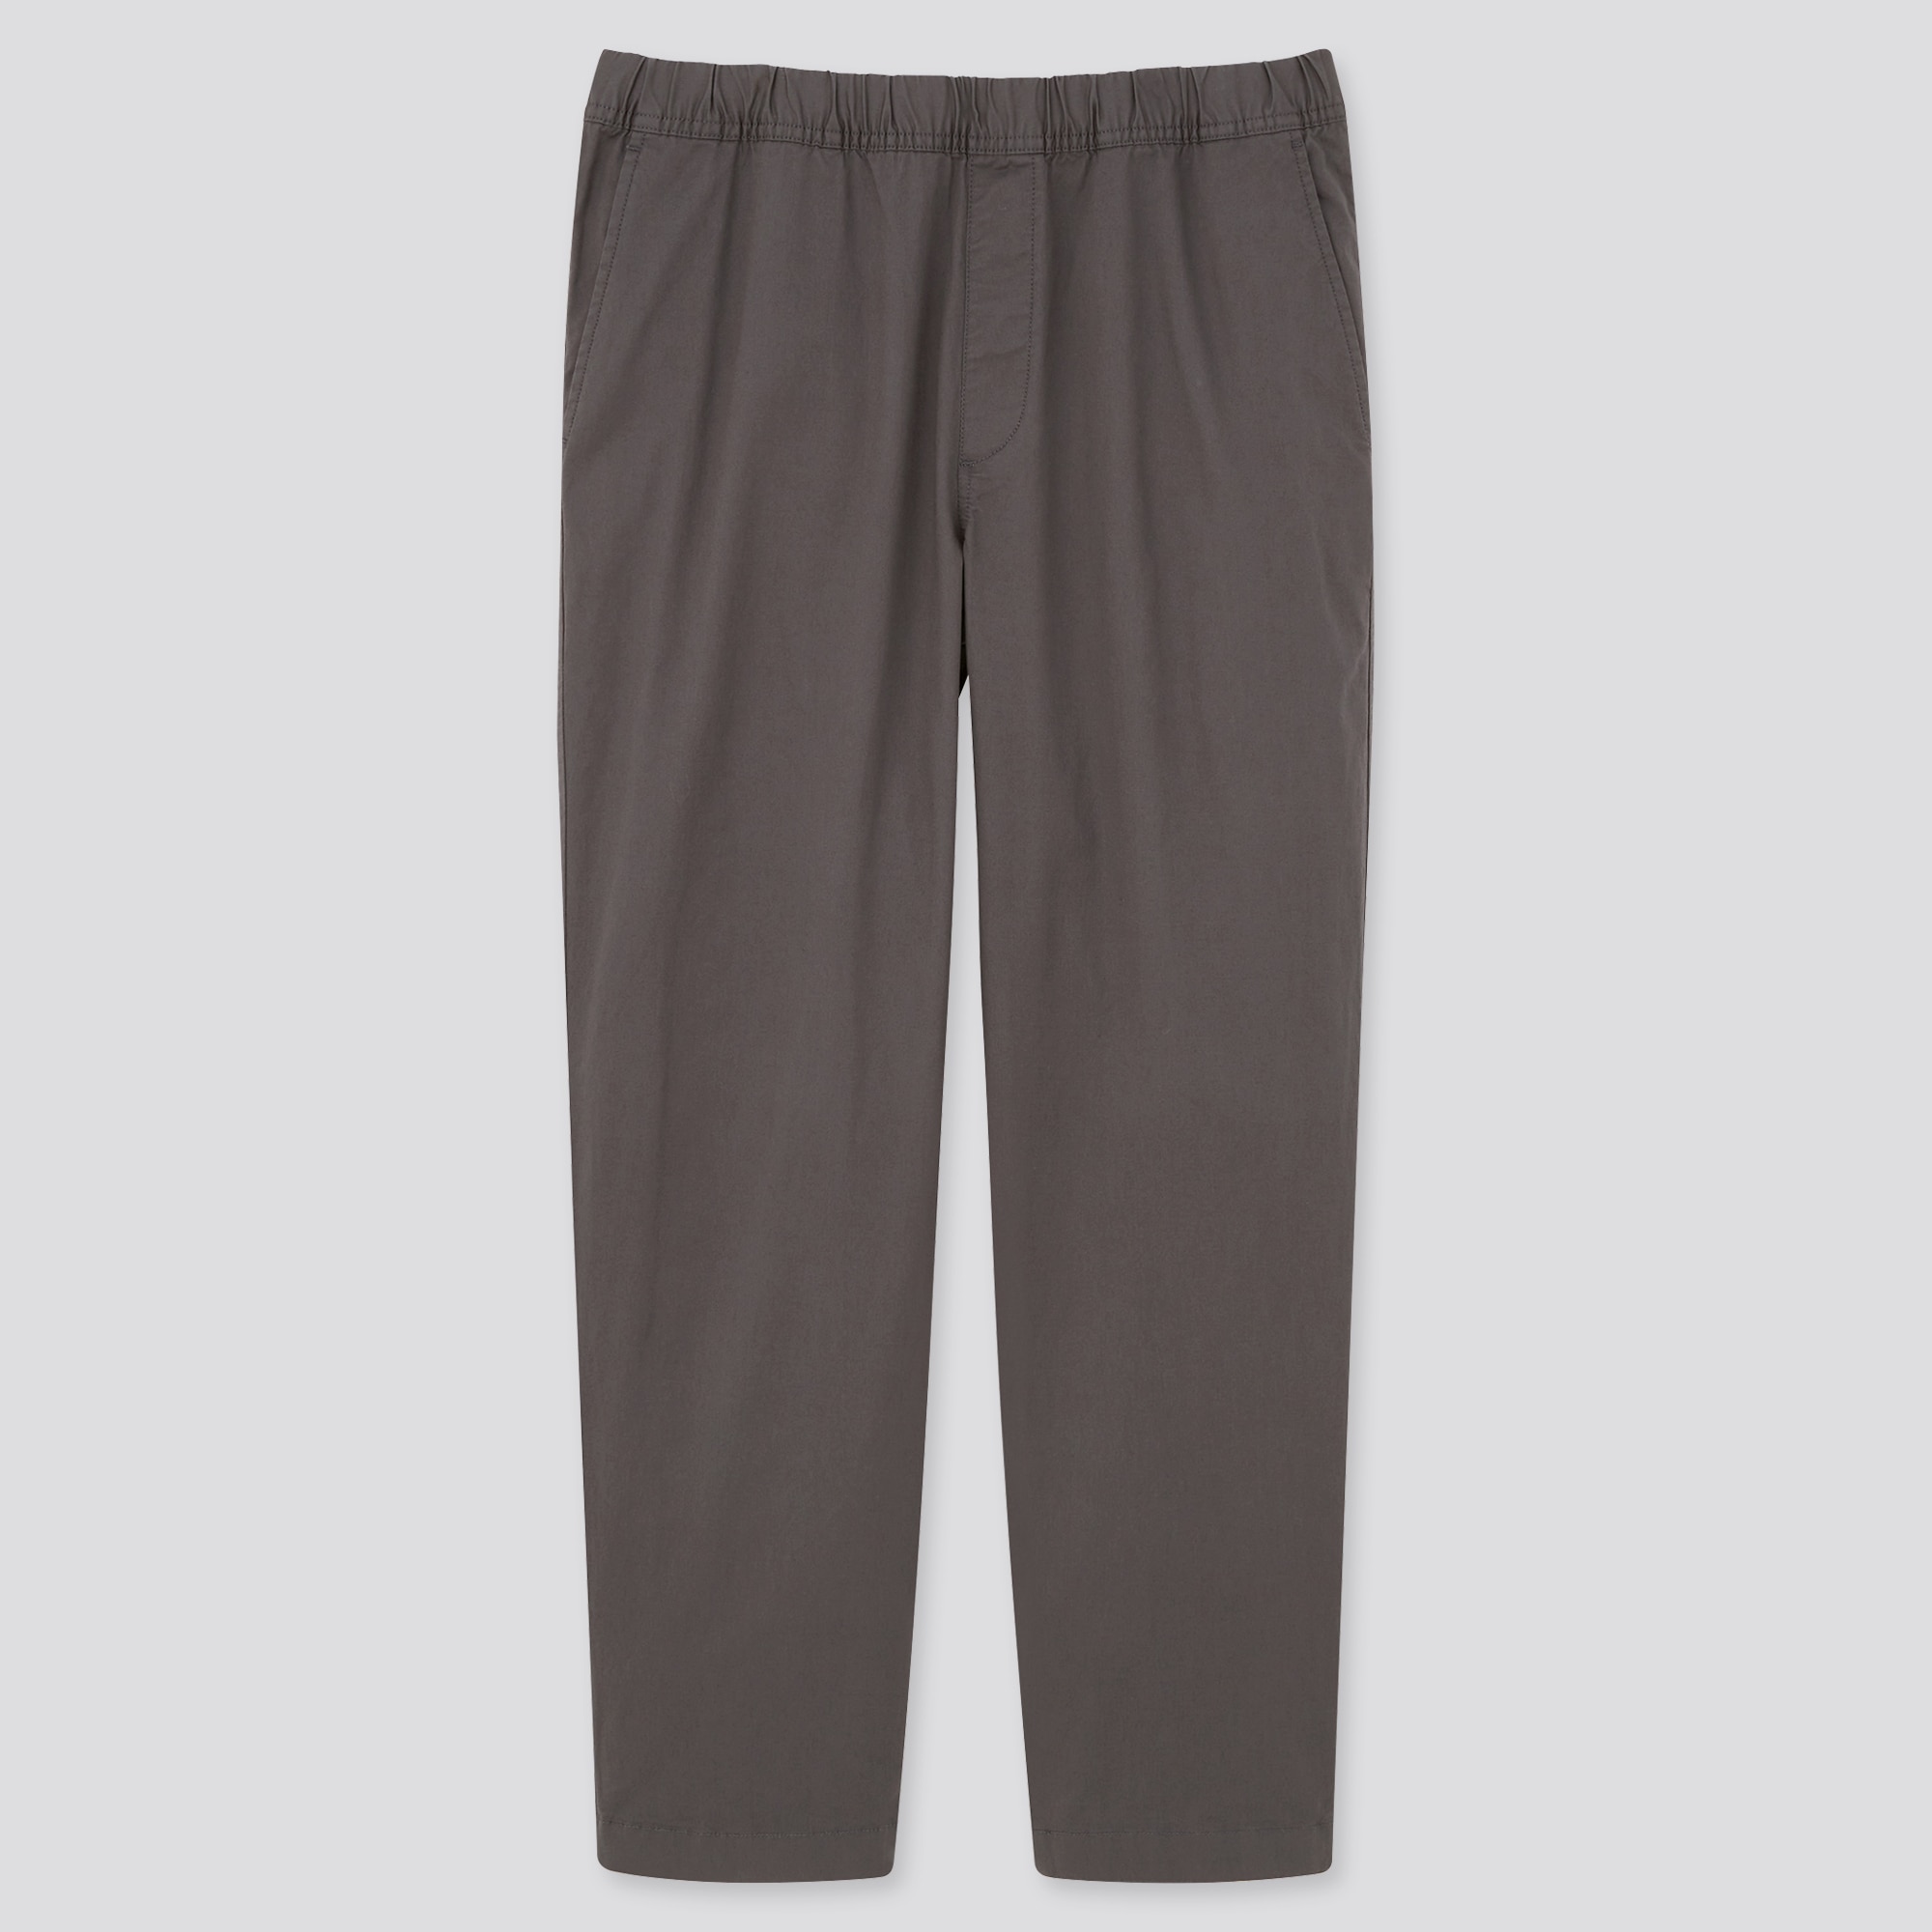 UNIQLO Malaysia - Throw on our Smart Ankle Pants and get